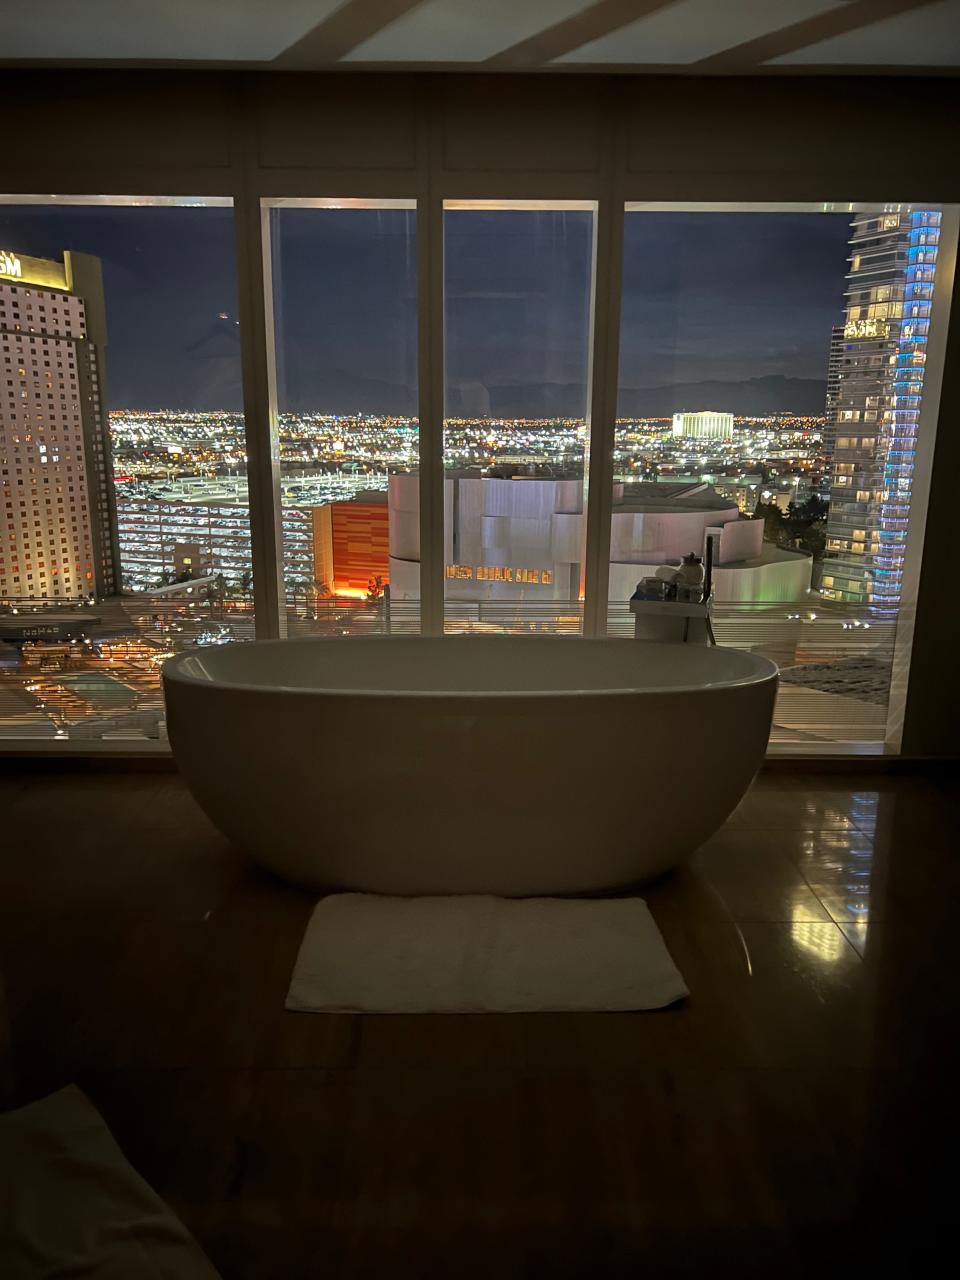 A standalone soaking tub at night with the city skyline behind it.